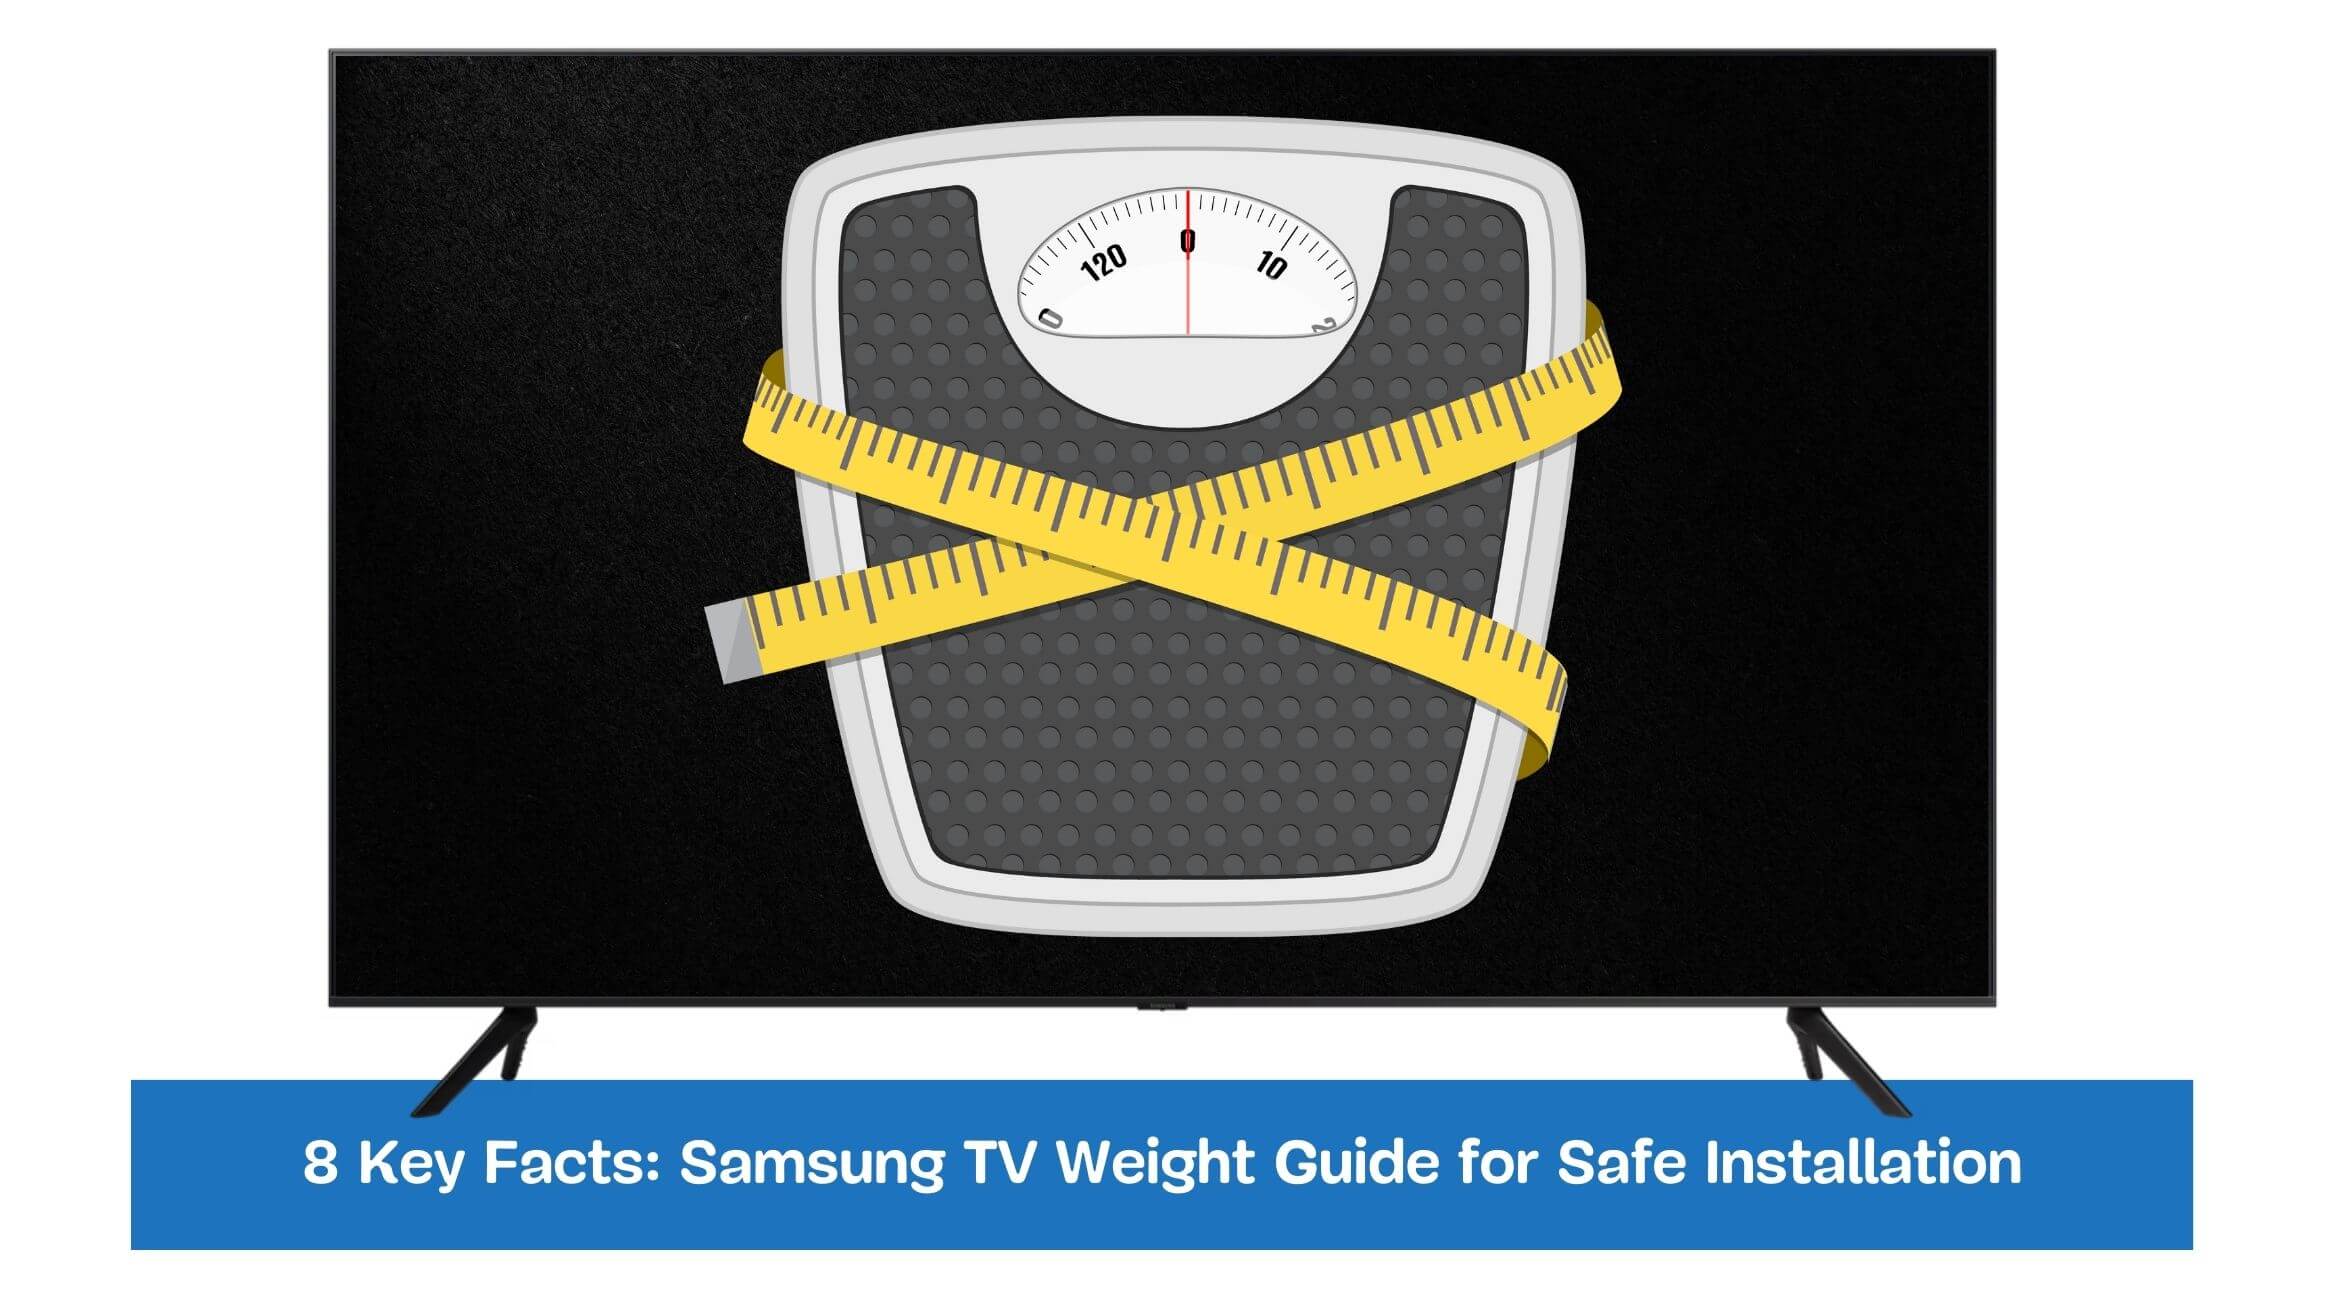 Samsung TV Weight Guide for Safe Installation